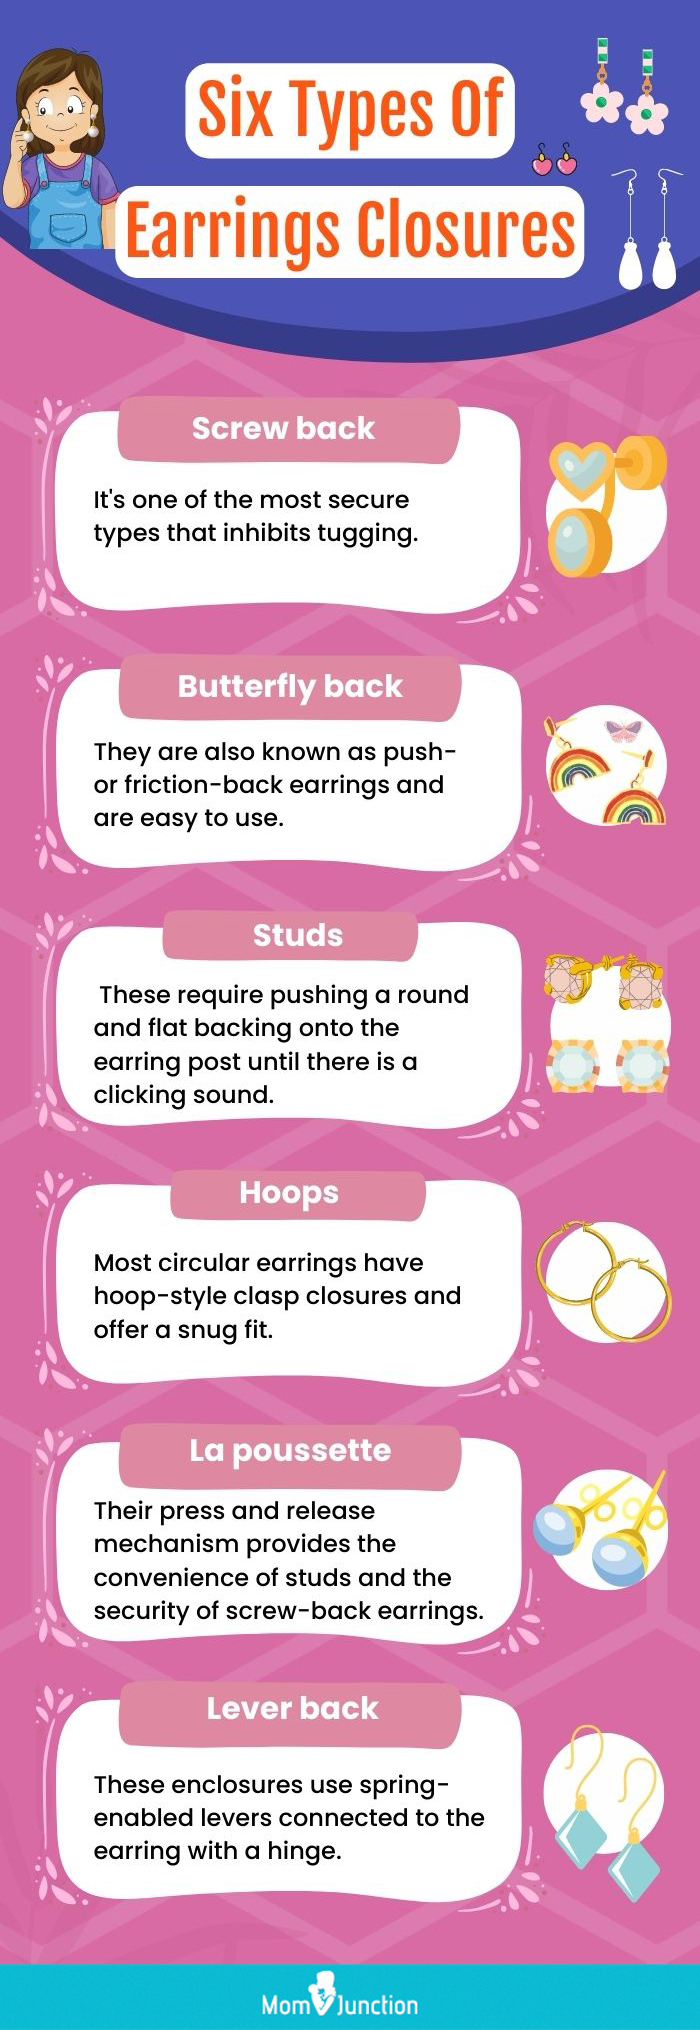 Six Types Of Earrings Closures (infographic)